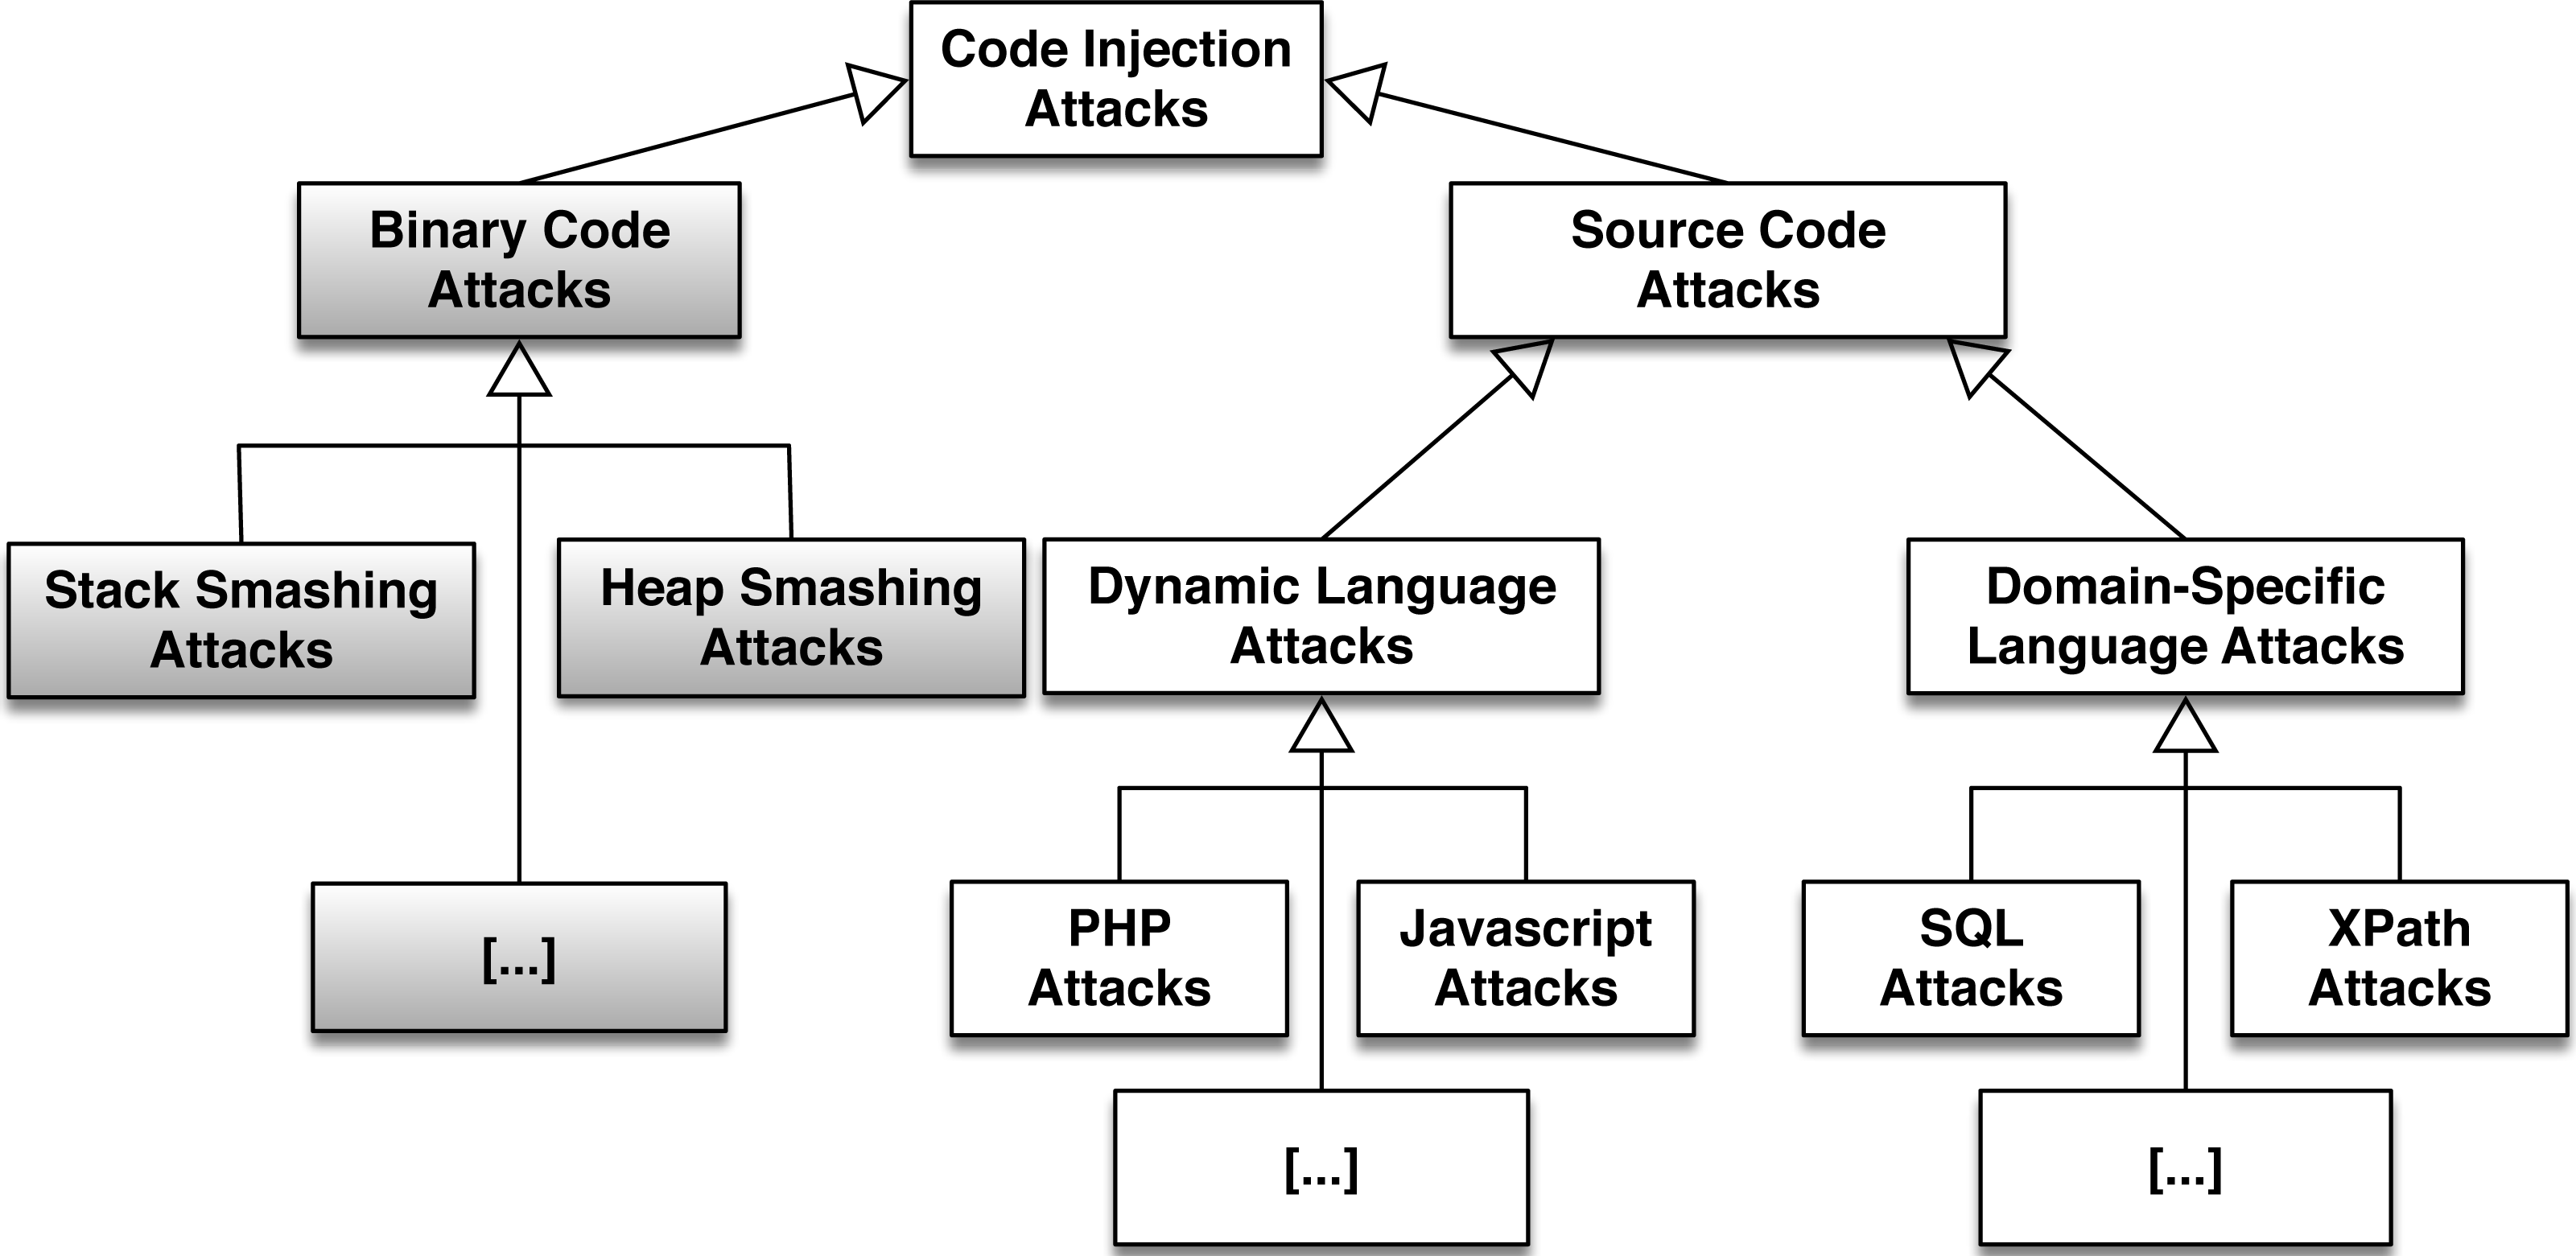 Fatal injection: a survey of modern code injection attack